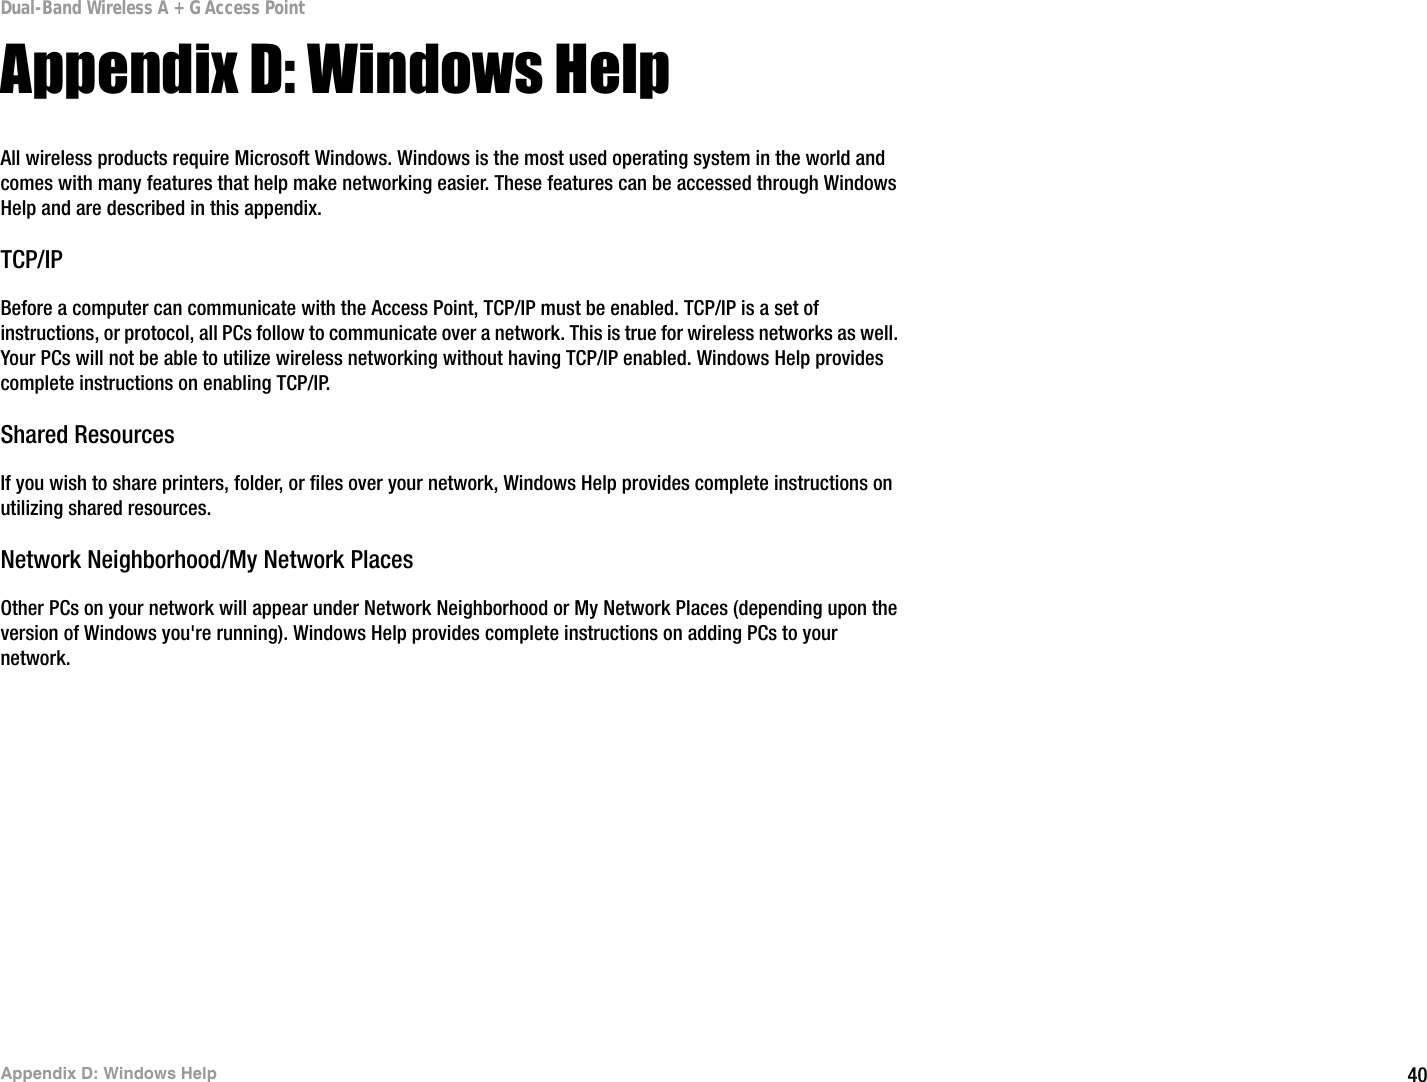 40Appendix D: Windows HelpDual-Band Wireless A + G Access PointAppendix D: Windows HelpAll wireless products require Microsoft Windows. Windows is the most used operating system in the world and comes with many features that help make networking easier. These features can be accessed through Windows Help and are described in this appendix.TCP/IPBefore a computer can communicate with the Access Point, TCP/IP must be enabled. TCP/IP is a set of instructions, or protocol, all PCs follow to communicate over a network. This is true for wireless networks as well. Your PCs will not be able to utilize wireless networking without having TCP/IP enabled. Windows Help provides complete instructions on enabling TCP/IP.Shared ResourcesIf you wish to share printers, folder, or files over your network, Windows Help provides complete instructions on utilizing shared resources.Network Neighborhood/My Network PlacesOther PCs on your network will appear under Network Neighborhood or My Network Places (depending upon the version of Windows you&apos;re running). Windows Help provides complete instructions on adding PCs to your network.